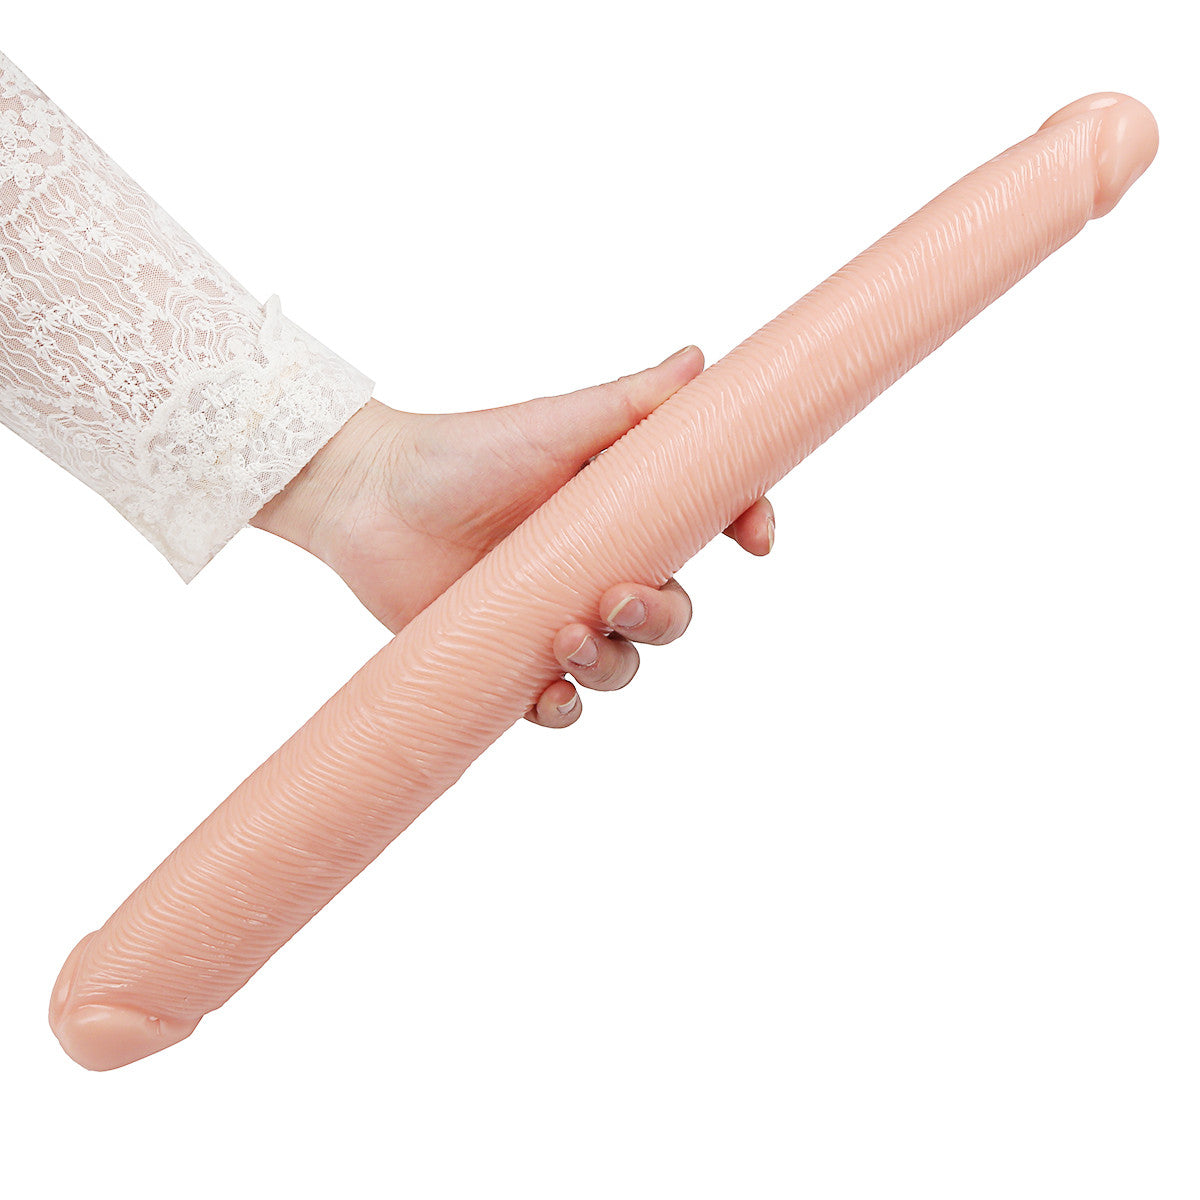 Realistic Double Ended Dildo in Pakistan